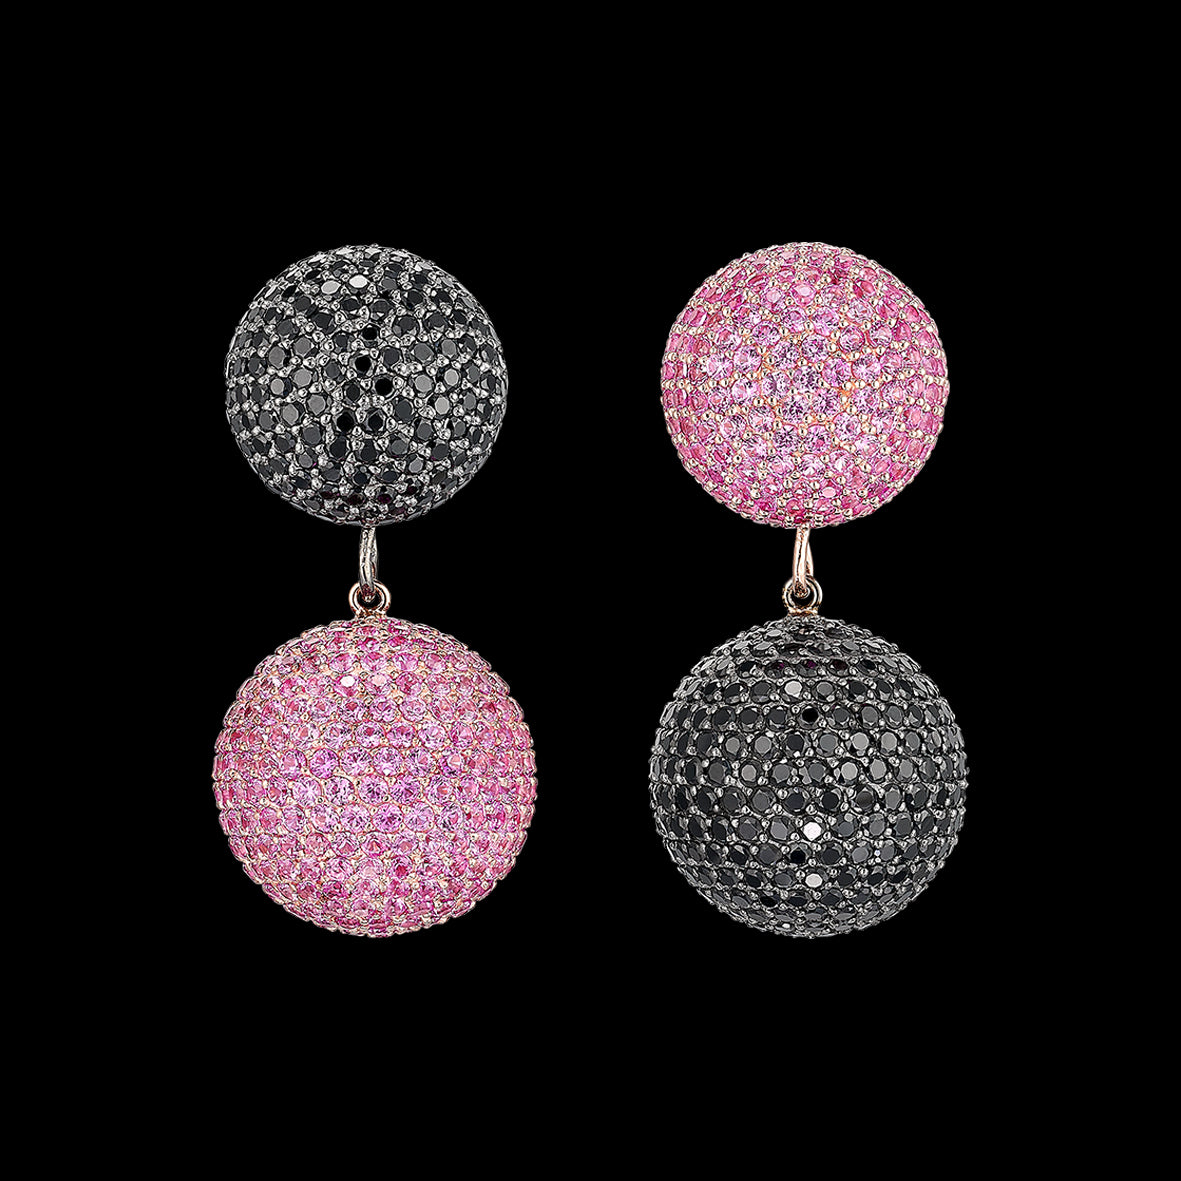 Black Pink Bauble Earrings, Earrings, Anabela Chan Joaillerie - Fine jewelry with laboratory grown and created gemstones hand-crafted in the United Kingdom. Anabela Chan Joaillerie is the first fine jewellery brand in the world to champion laboratory-grown and created gemstones with high jewellery design, artisanal craftsmanship and a focus on ethical and sustainable innovations.